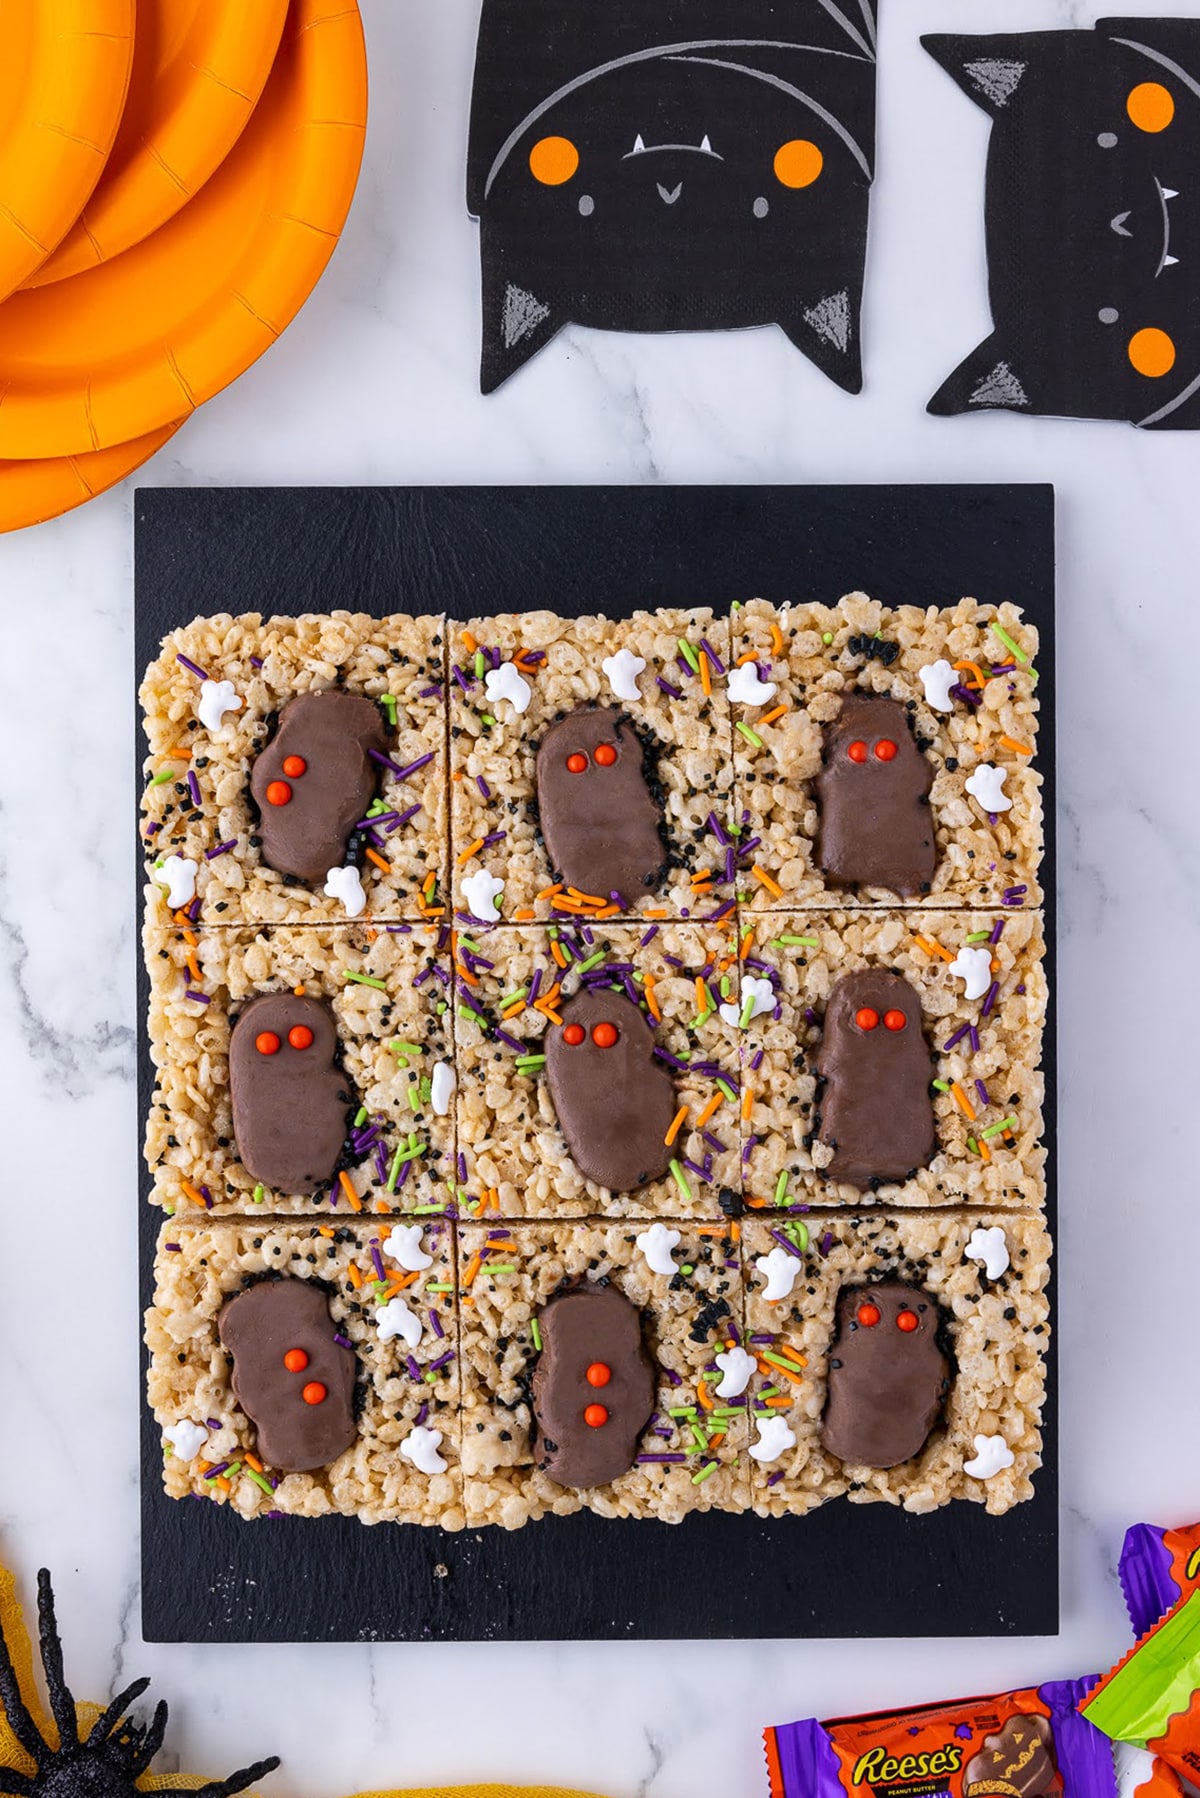 six rice crispie treats on a black slab with reese's peanut butter cups, wrapped candies, orange paper plates and bat napkins